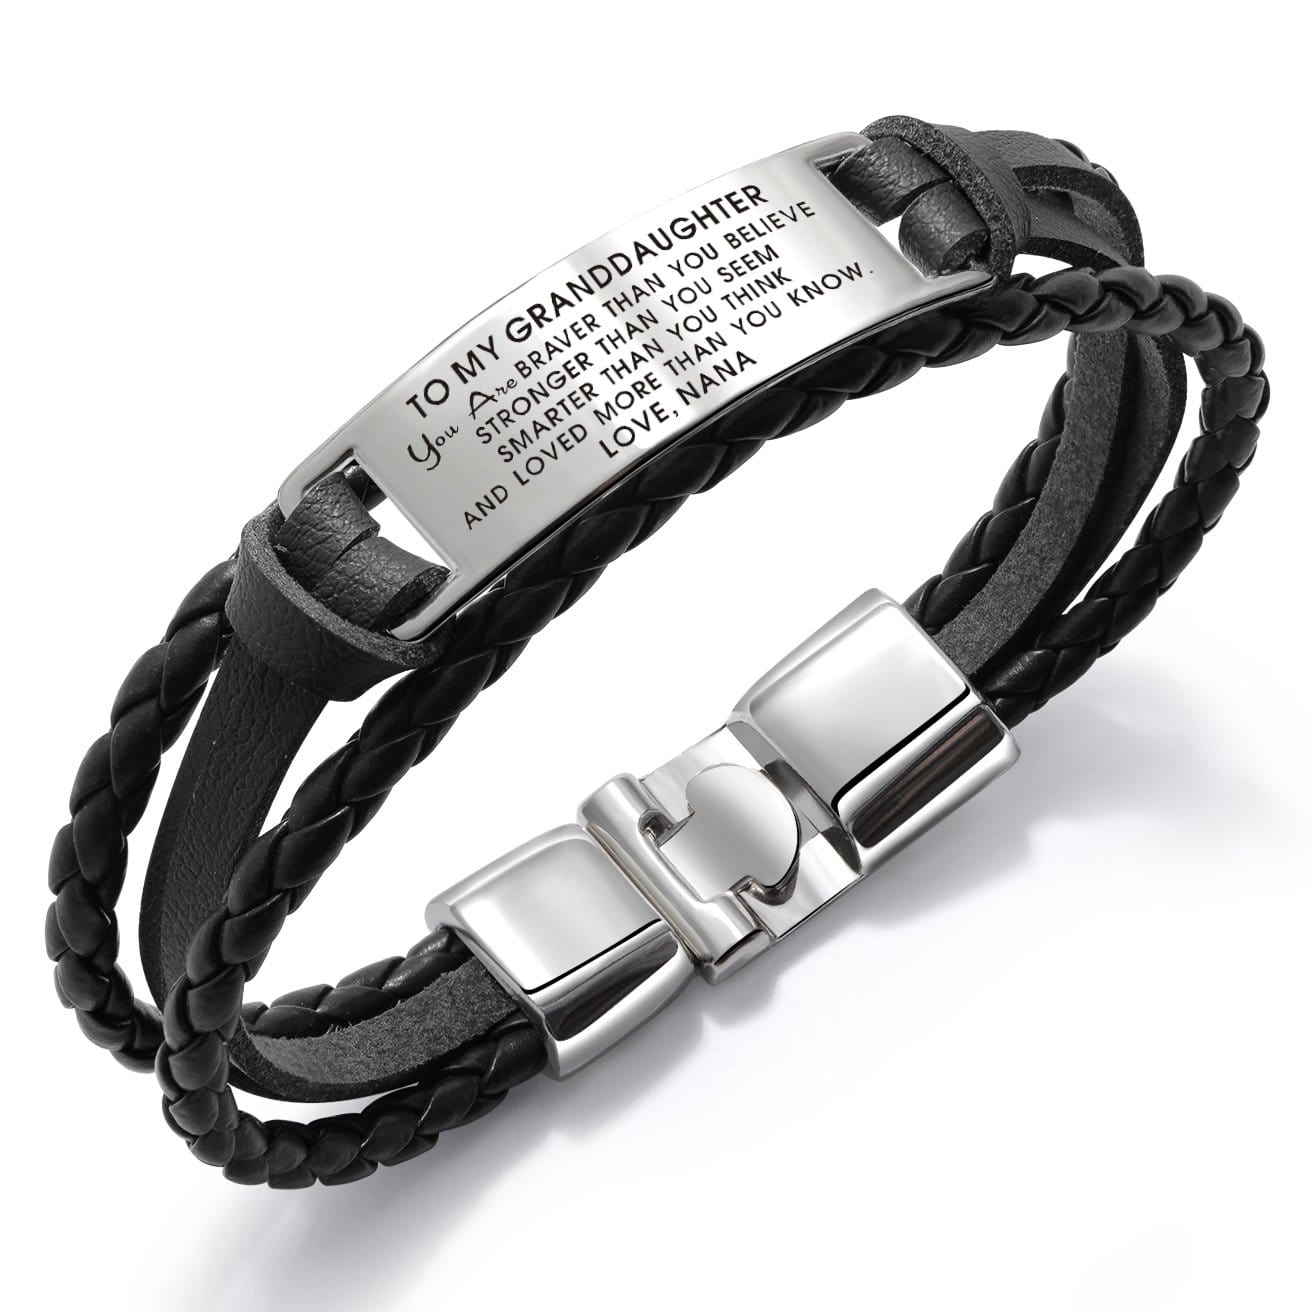 Bracelets Nana To Granddaughter - You Are Loved More Than You Know Leather Bracelet Black GiveMe-Gifts